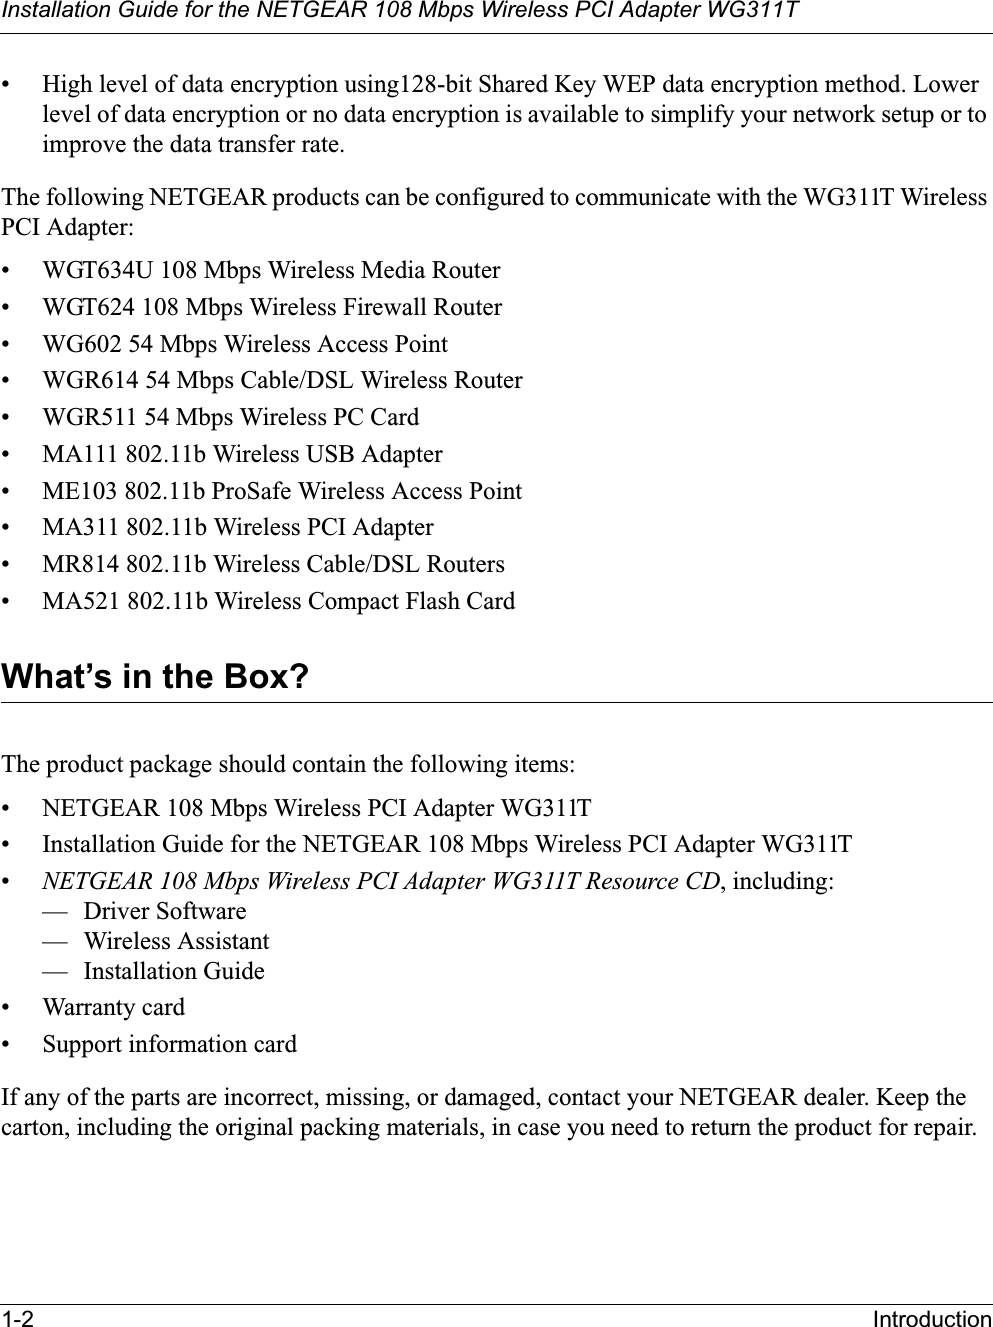 Installation Guide for the NETGEAR 108 Mbps Wireless PCI Adapter WG311T1-2 Introduction• High level of data encryption using128-bit Shared Key WEP data encryption method. Lower level of data encryption or no data encryption is available to simplify your network setup or to improve the data transfer rate.The following NETGEAR products can be configured to communicate with the WG311T Wireless PCI Adapter:• WGT634U 108 Mbps Wireless Media Router• WGT624 108 Mbps Wireless Firewall Router• WG602 54 Mbps Wireless Access Point• WGR614 54 Mbps Cable/DSL Wireless Router• WGR511 54 Mbps Wireless PC Card• MA111 802.11b Wireless USB Adapter• ME103 802.11b ProSafe Wireless Access Point• MA311 802.11b Wireless PCI Adapter• MR814 802.11b Wireless Cable/DSL Routers• MA521 802.11b Wireless Compact Flash CardWhat’s in the Box?The product package should contain the following items:• NETGEAR 108 Mbps Wireless PCI Adapter WG311T• Installation Guide for the NETGEAR 108 Mbps Wireless PCI Adapter WG311T•NETGEAR 108 Mbps Wireless PCI Adapter WG311T Resource CD, including:— Driver Software— Wireless Assistant— Installation Guide• Warranty card• Support information cardIf any of the parts are incorrect, missing, or damaged, contact your NETGEAR dealer. Keep the carton, including the original packing materials, in case you need to return the product for repair.